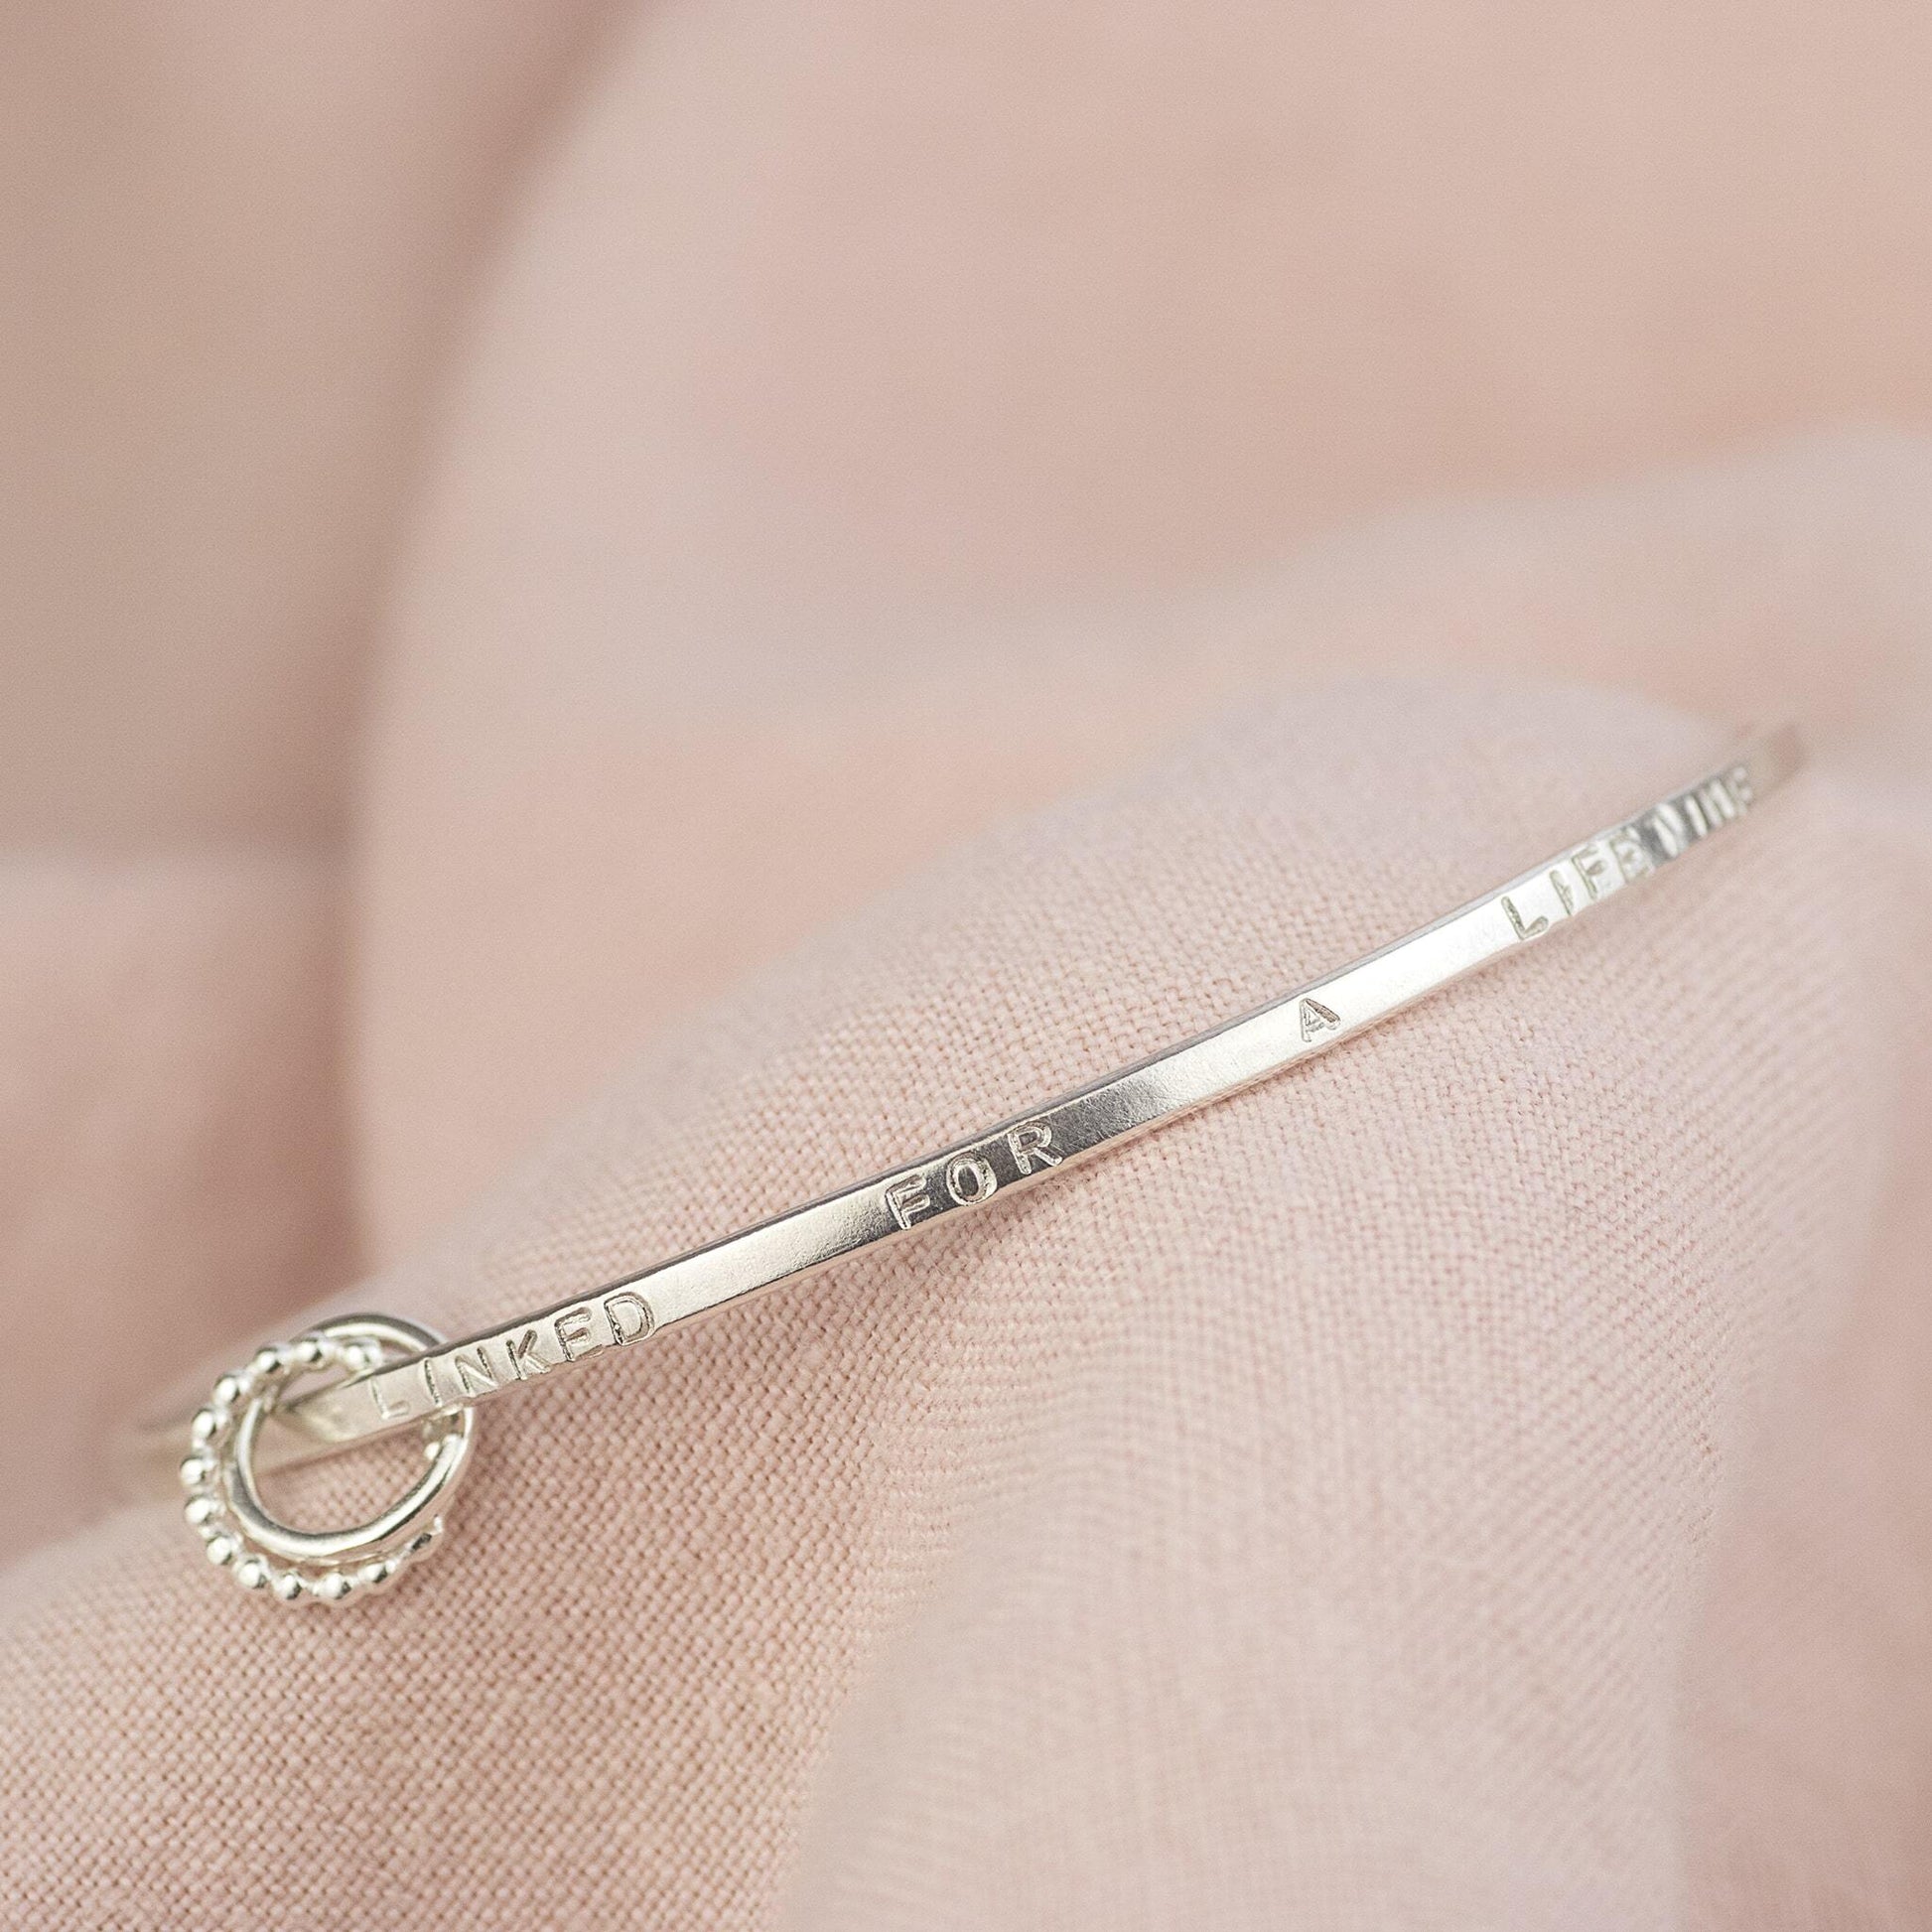 Linked for a Lifetime Bangle - Jewellery for Loved One